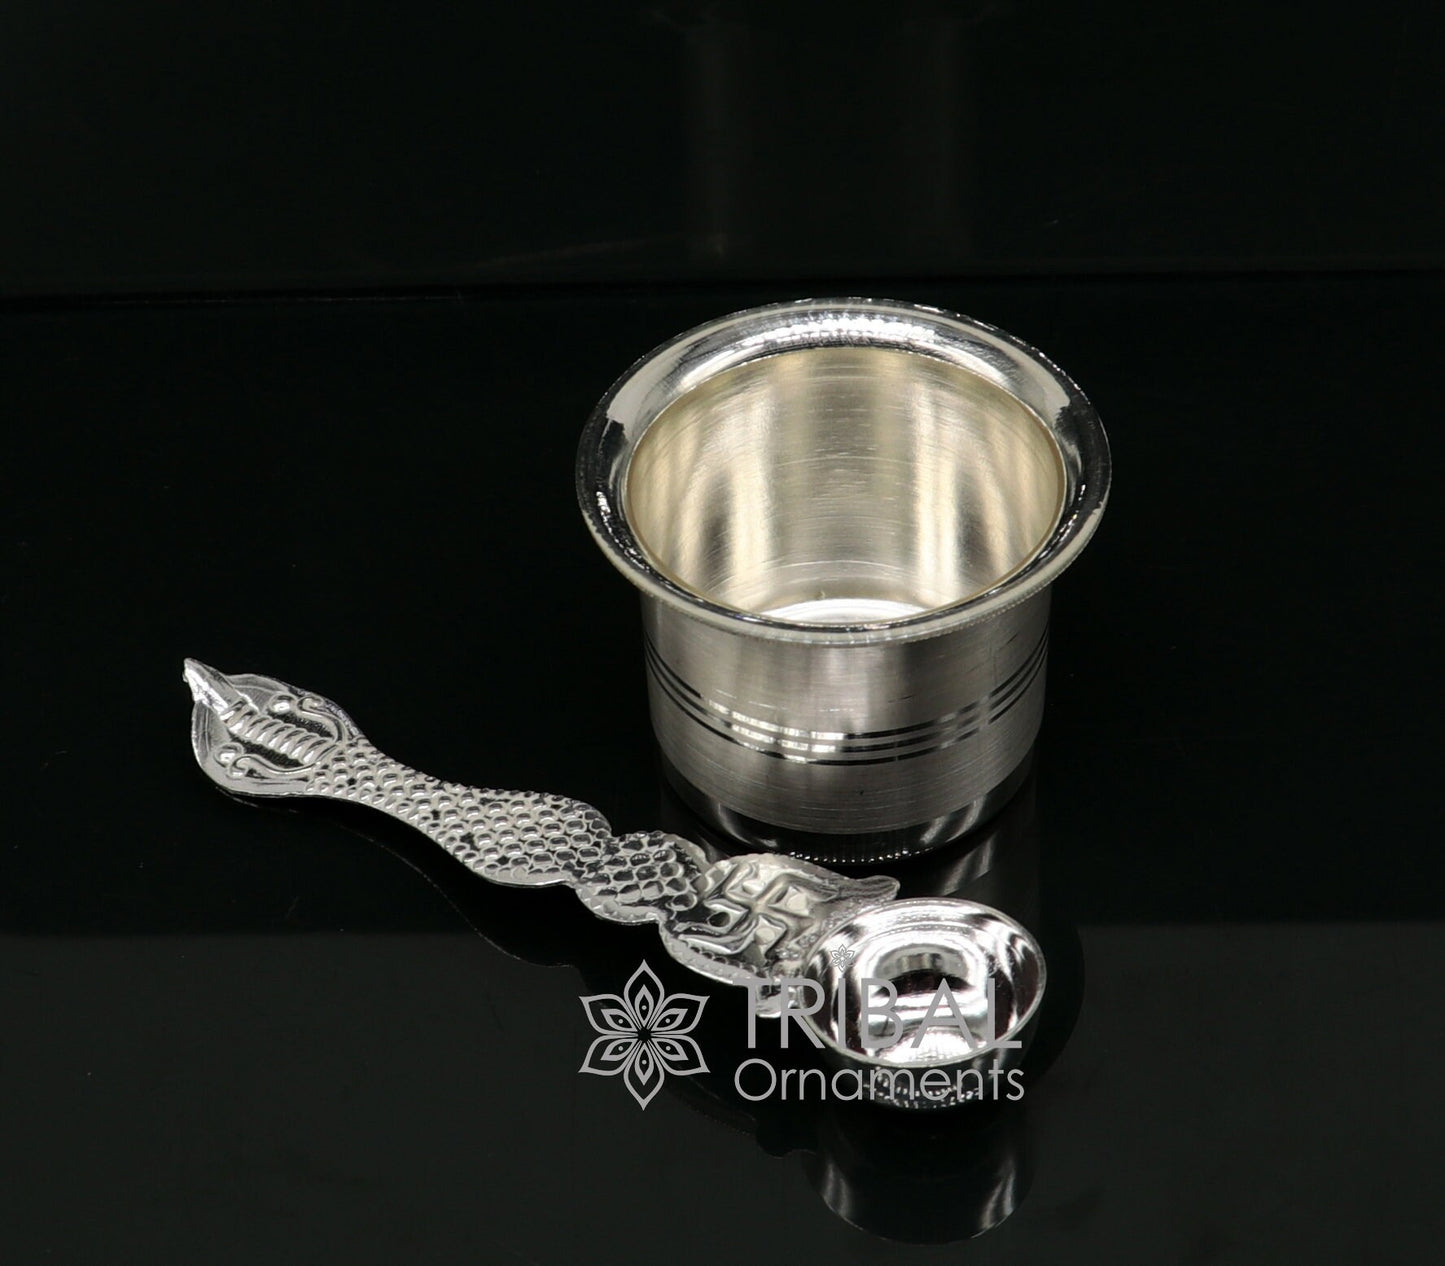 999  fine silver Panchamrit bowl or baby kids milk serving bowl, pure silver utensils, home and temple puja accessories india su1038 - TRIBAL ORNAMENTS